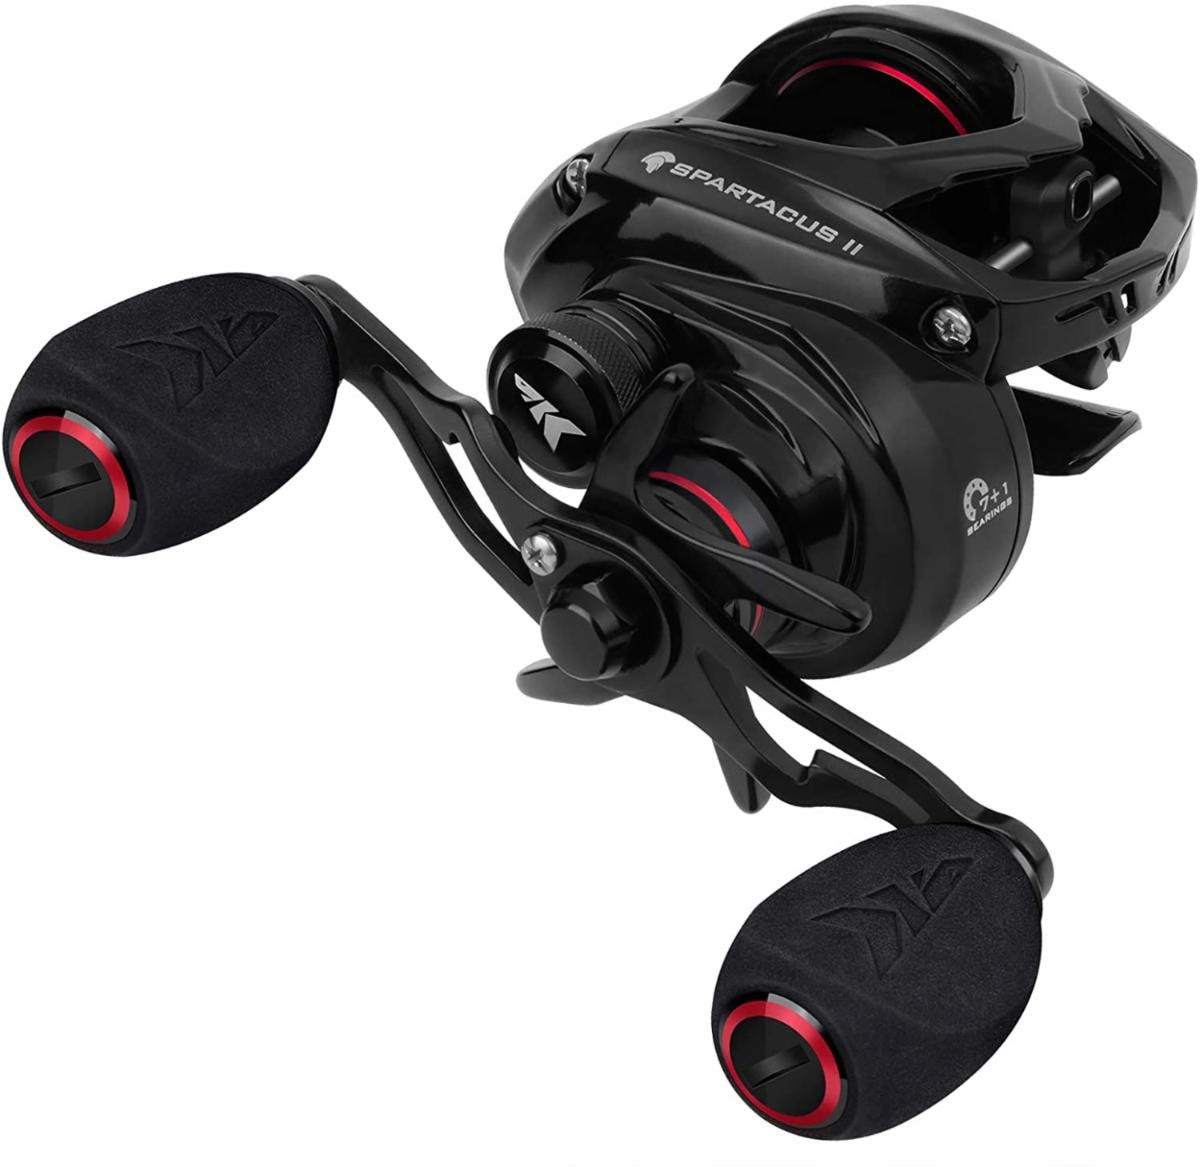 KastKing Introduces Three New Best Value Fishing Reels OutdoorsFIRST